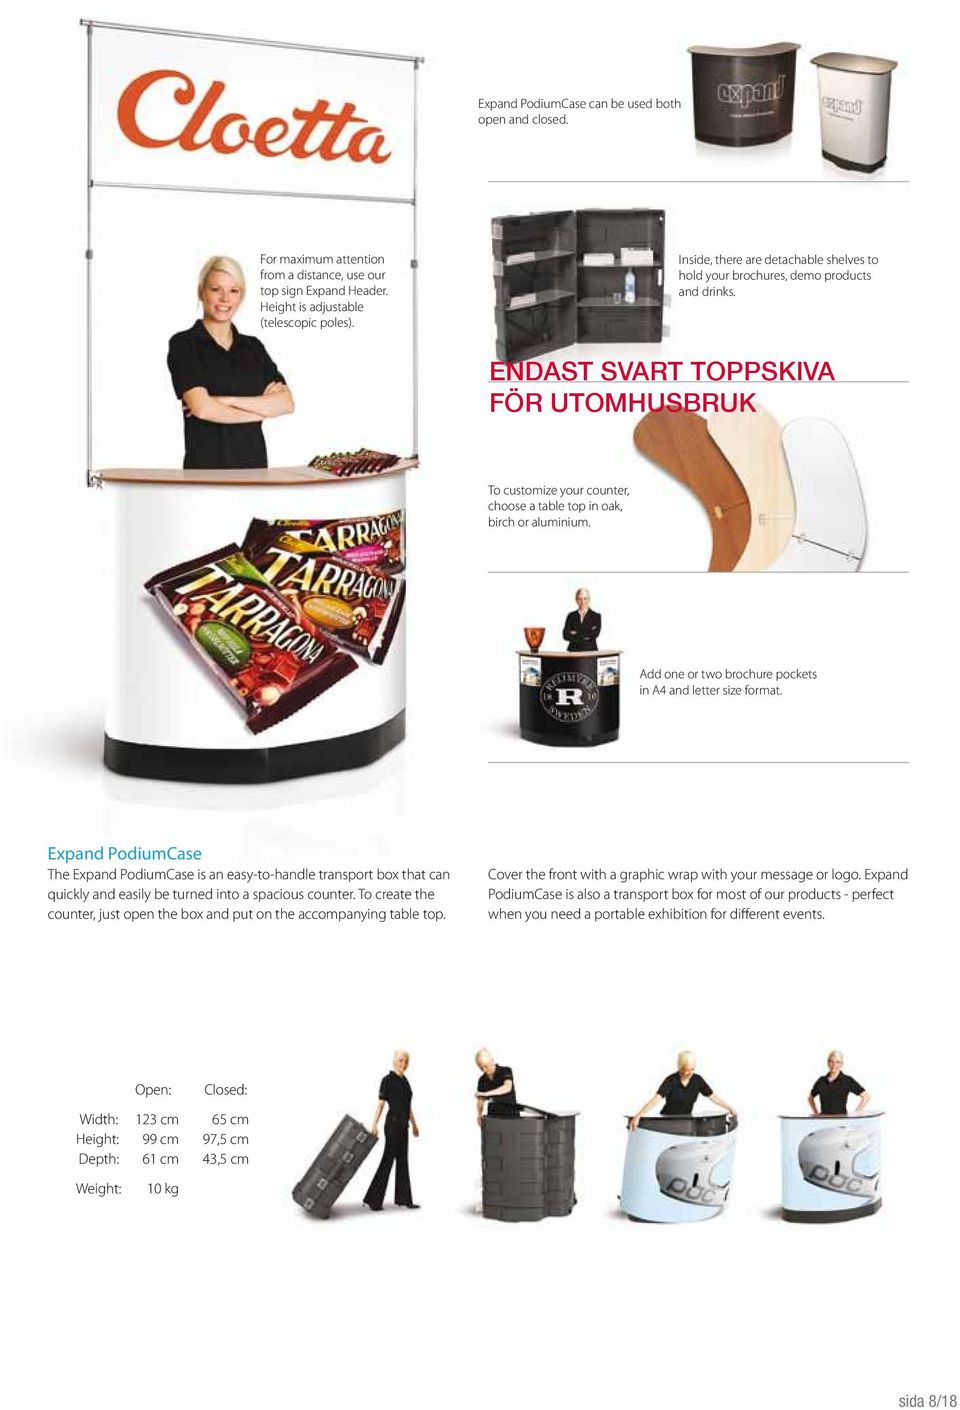 Add one or two brochure pockets in A4 and letter size format. Expand PodiumCase The Expand PodiumCase is an easy-to-handle transport box that can quickly and easily be turned into a spacious counter.